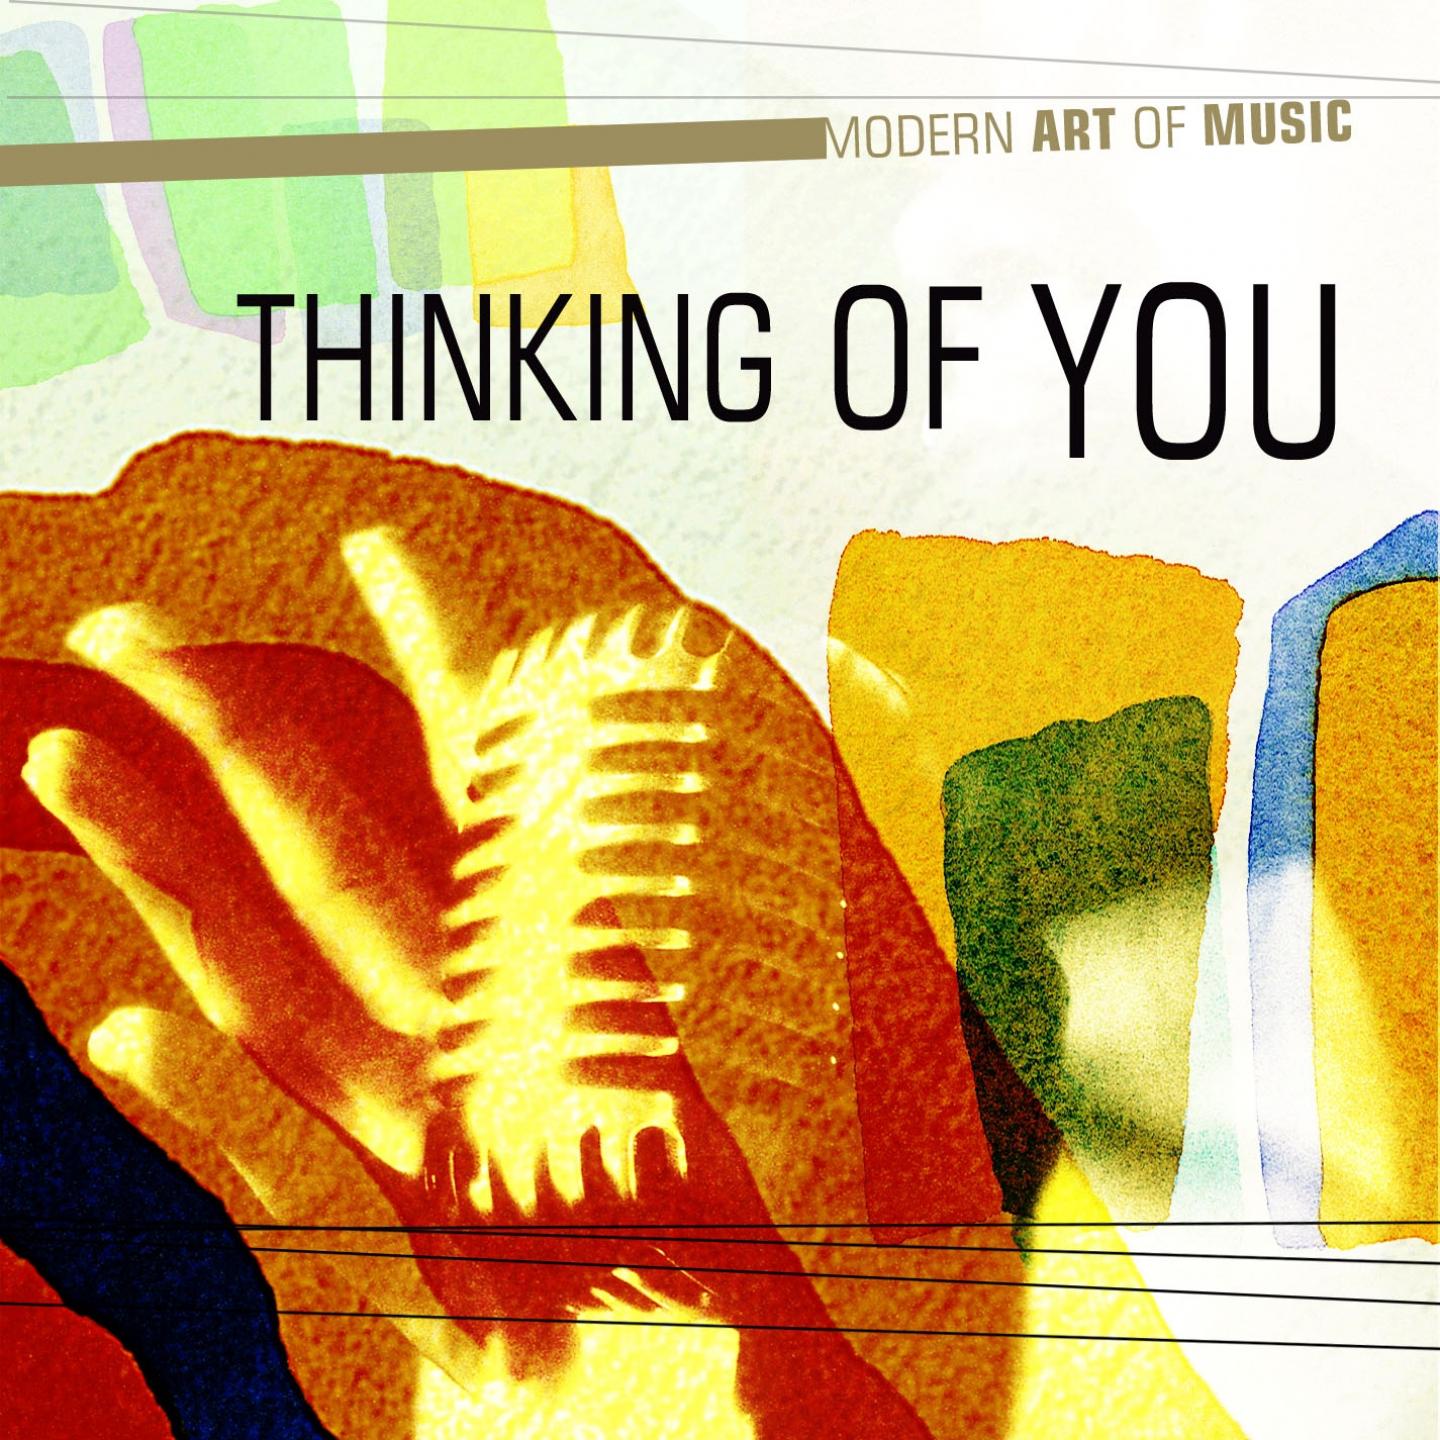 Modern Art of Music: Thinking of You